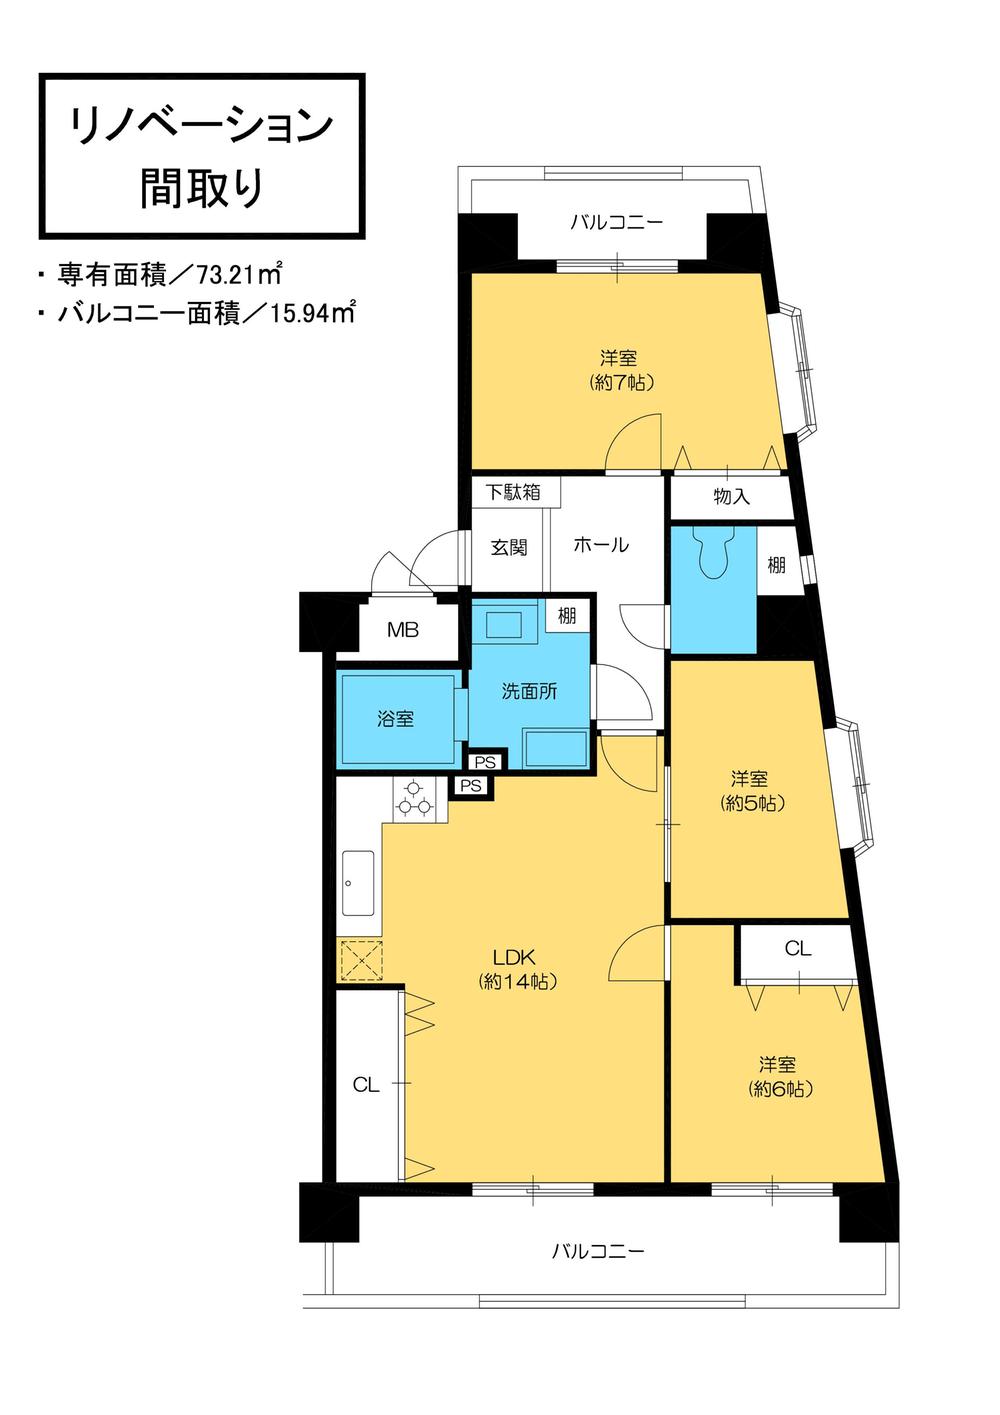 Other. Renovation plan to 3LDK (Reference)